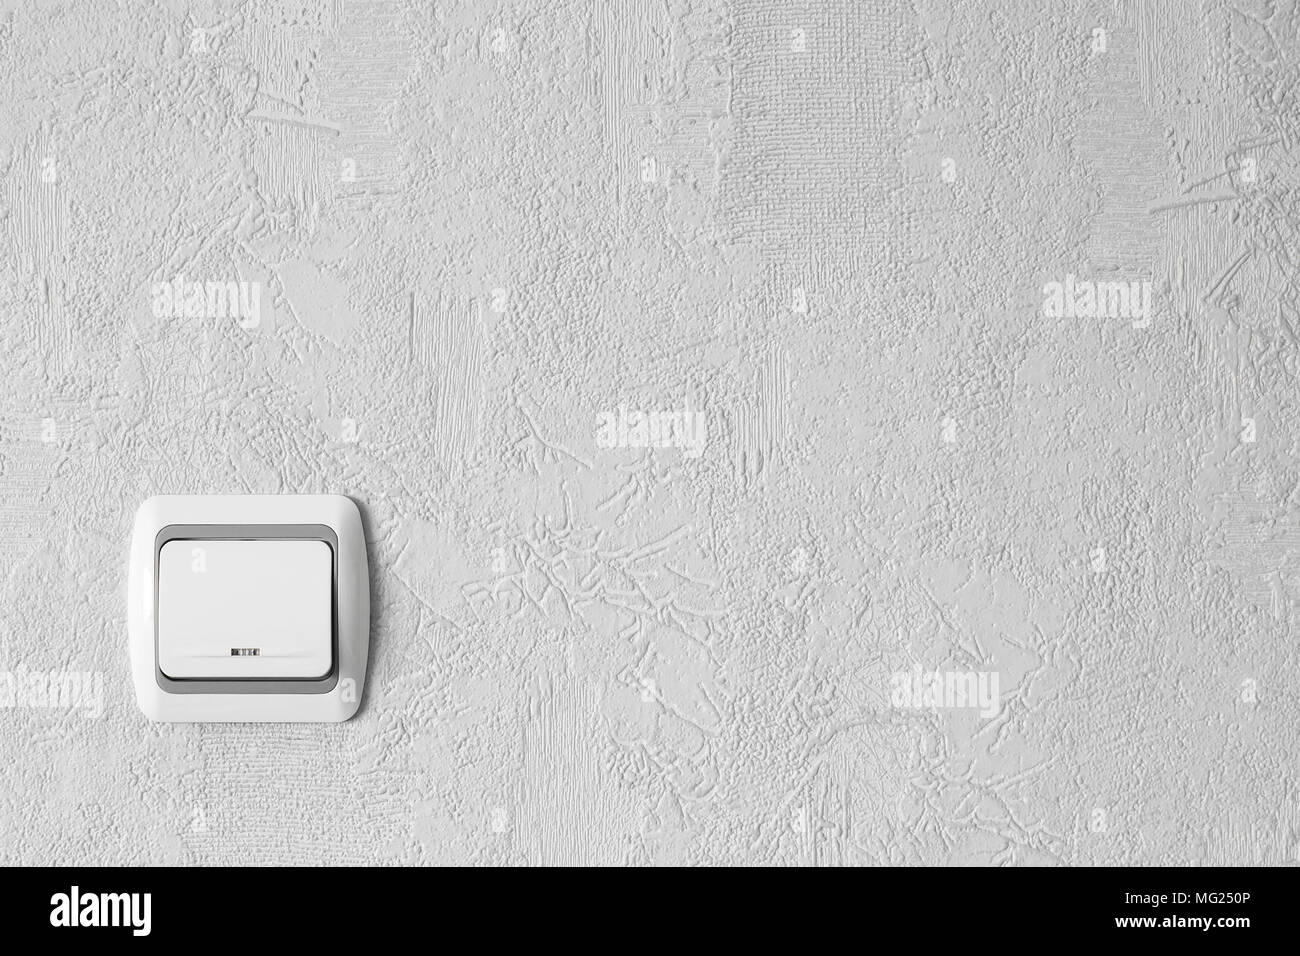 White light switch on a wall. Light switch with copy space. Minimalism. Concept. Background. Stock Photo